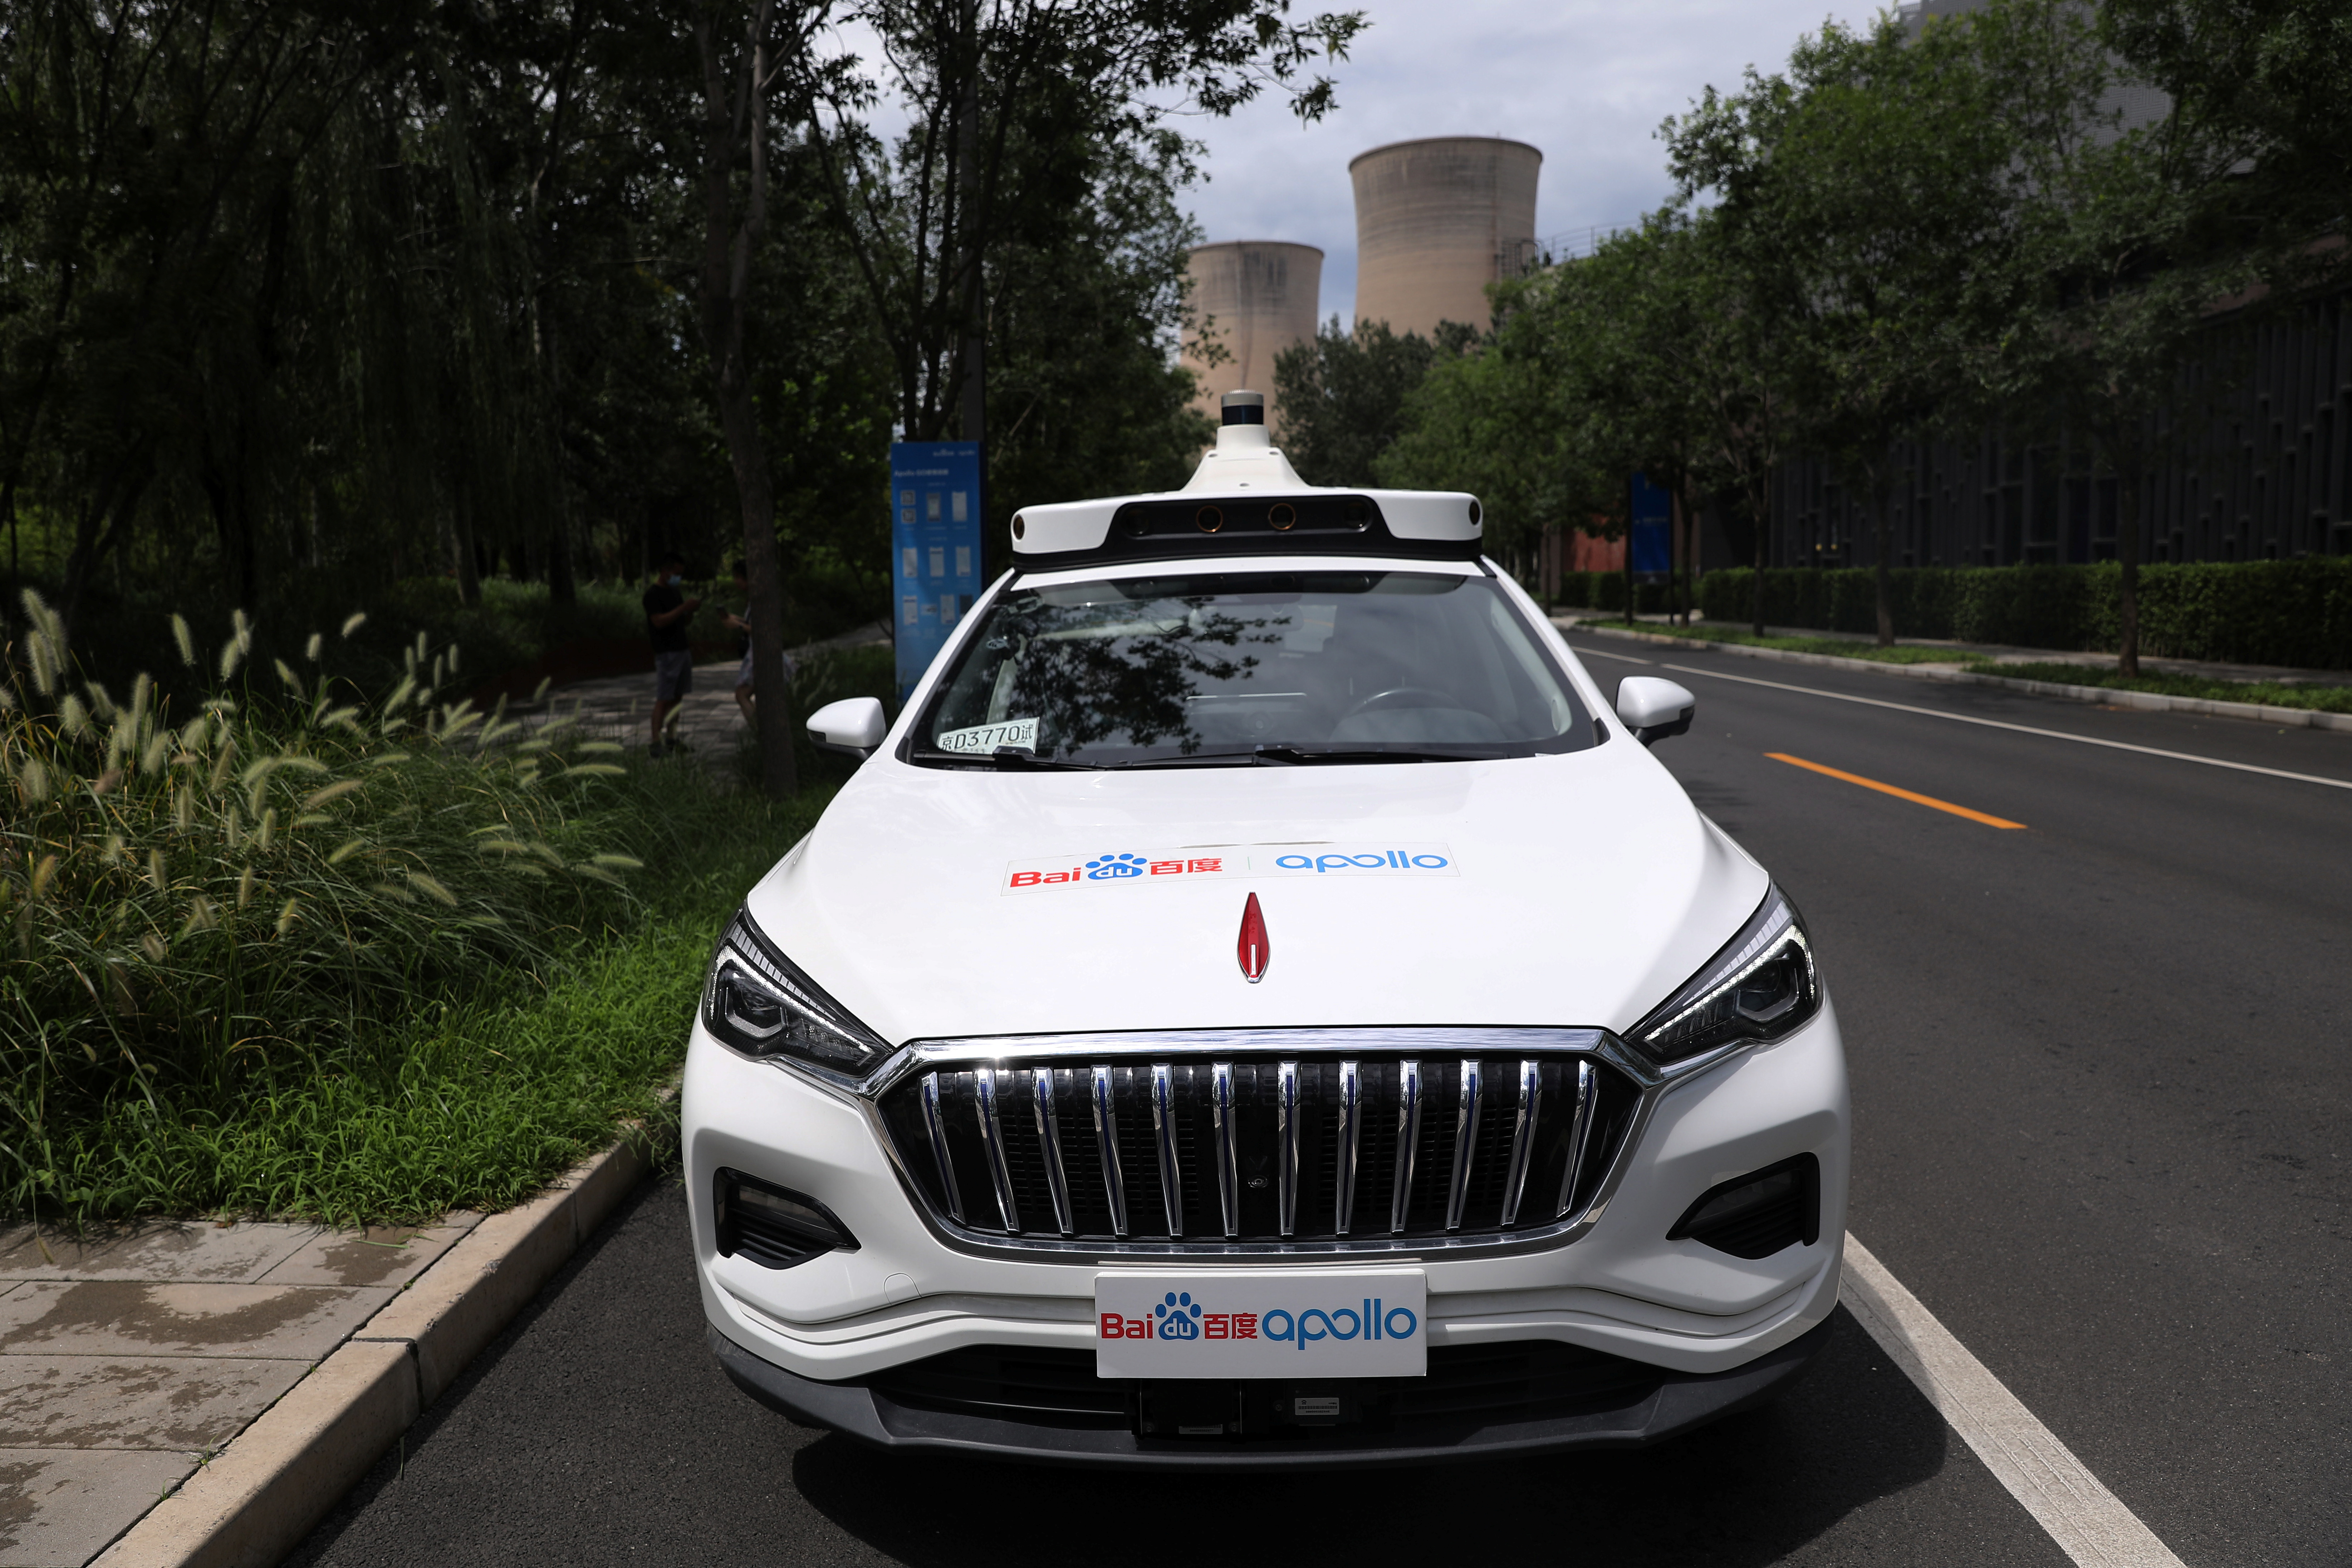 Baidu's Apollo car with an autonomous driving system, which serves for self-driving taxi services, is seen at the Shougang Industry Park in Beijing